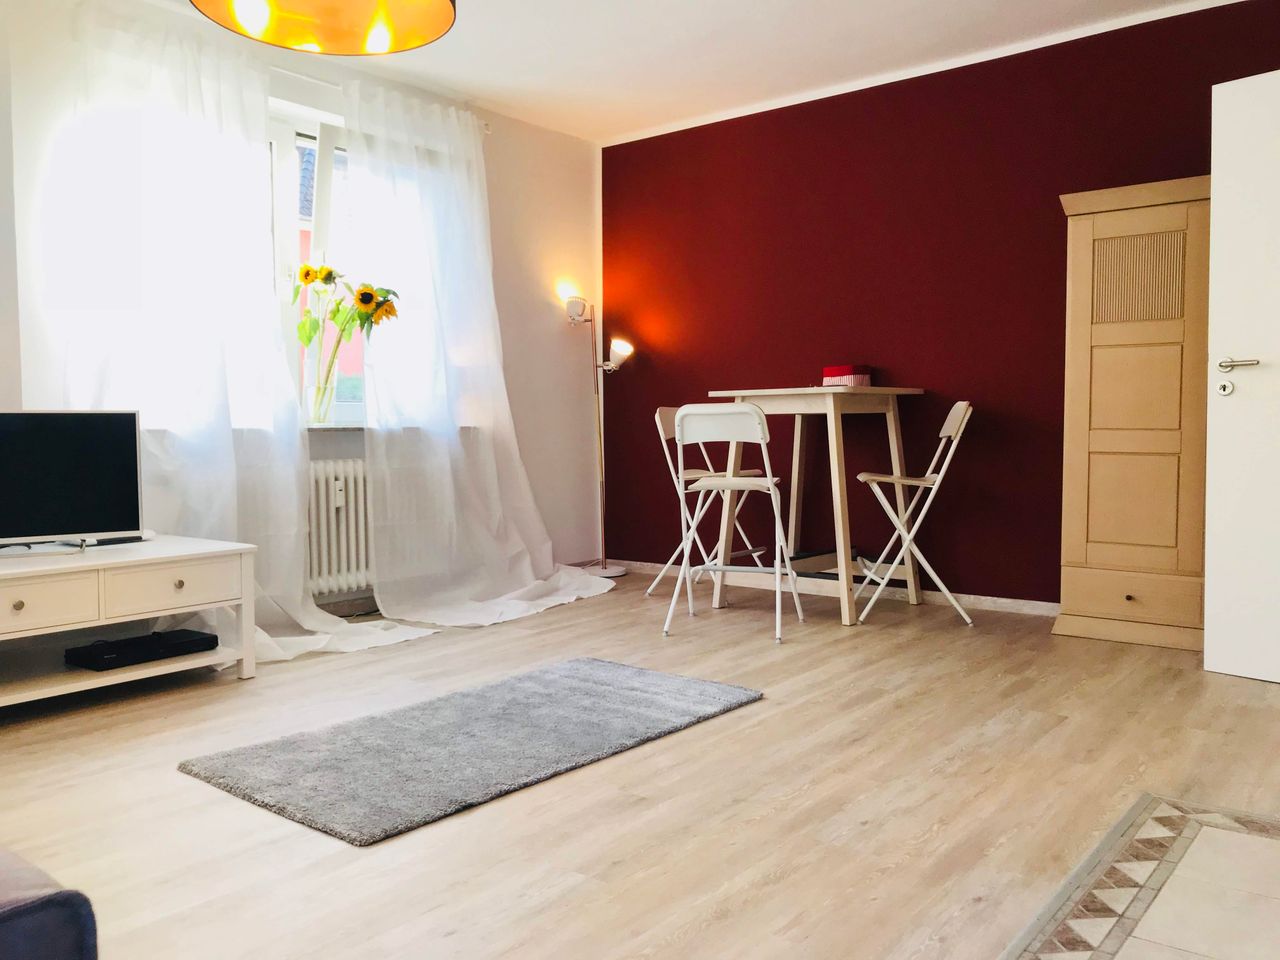 Modern & spacious studio located in the heart of Essen